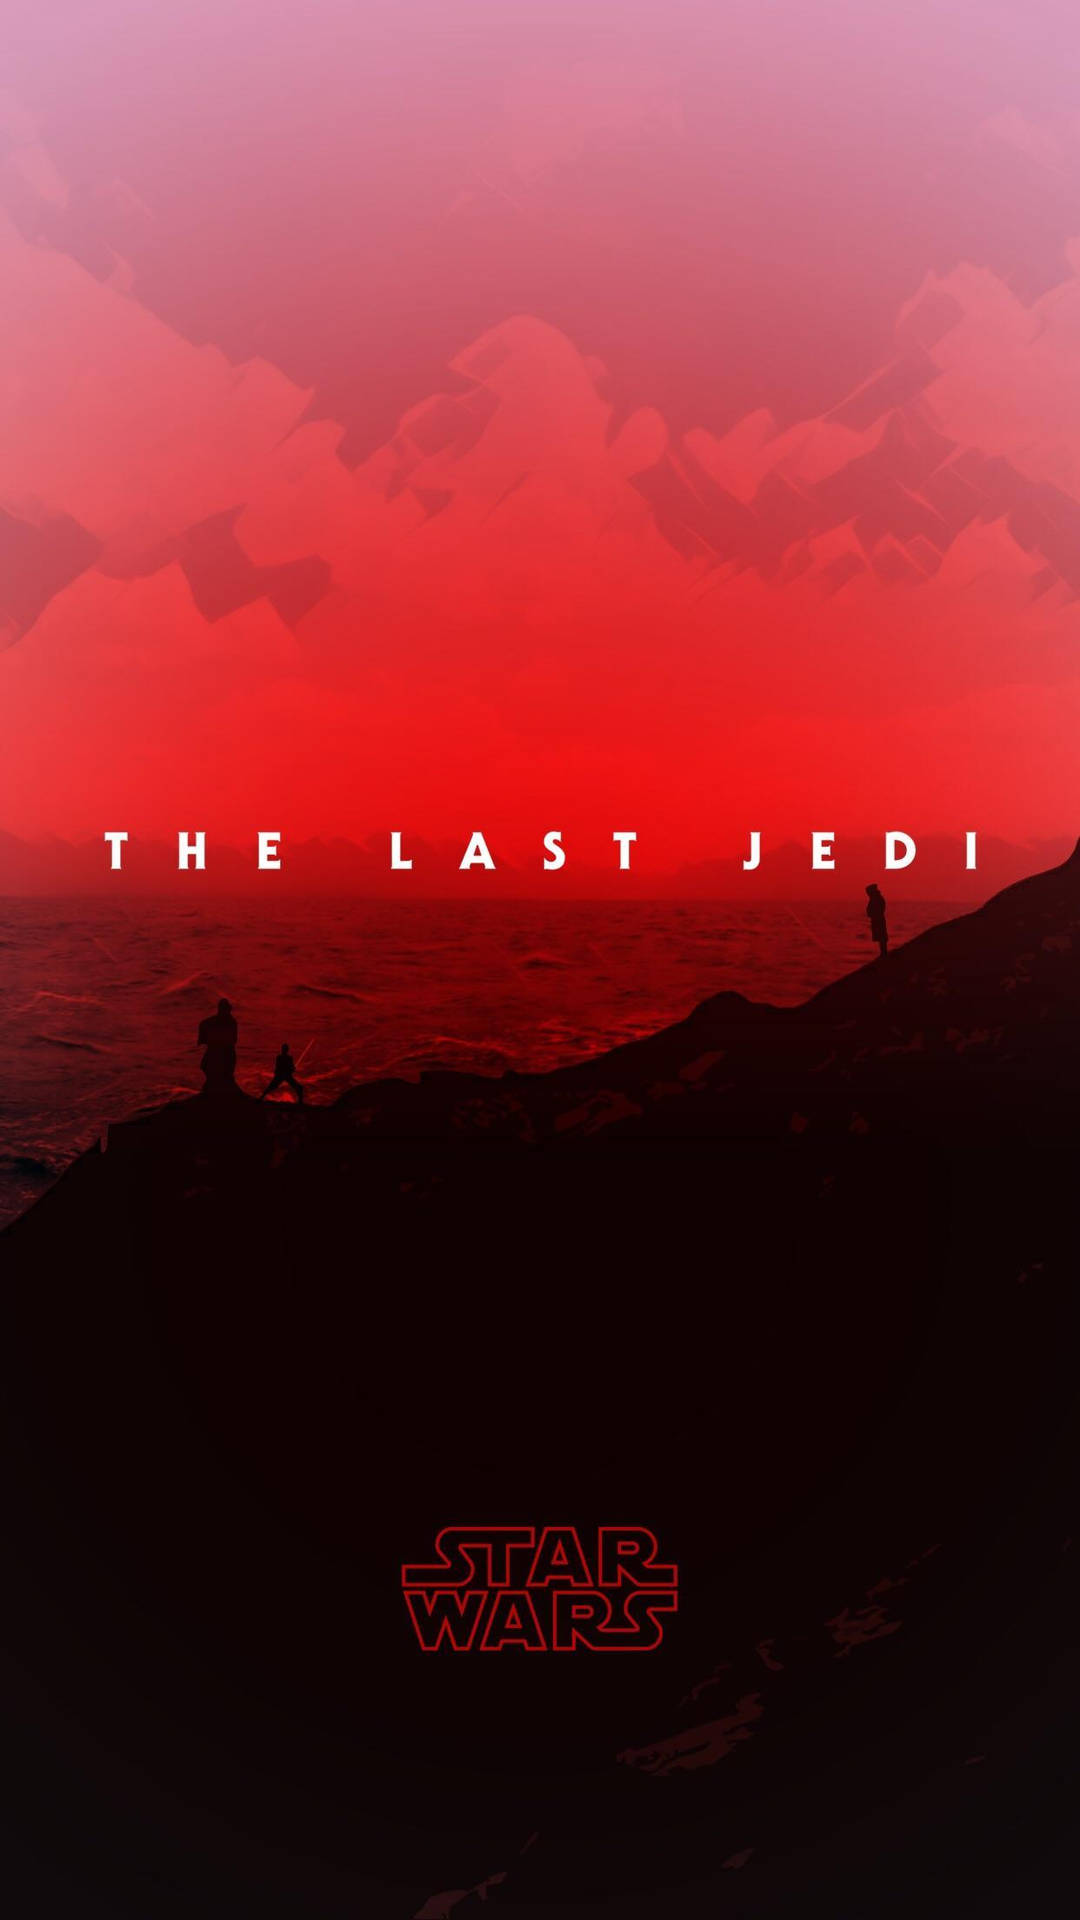 Star Wars The Last Jedi Promo Artwork, HD Movies, 4k Wallpapers, Images,  Backgrounds, Photos and Pictures